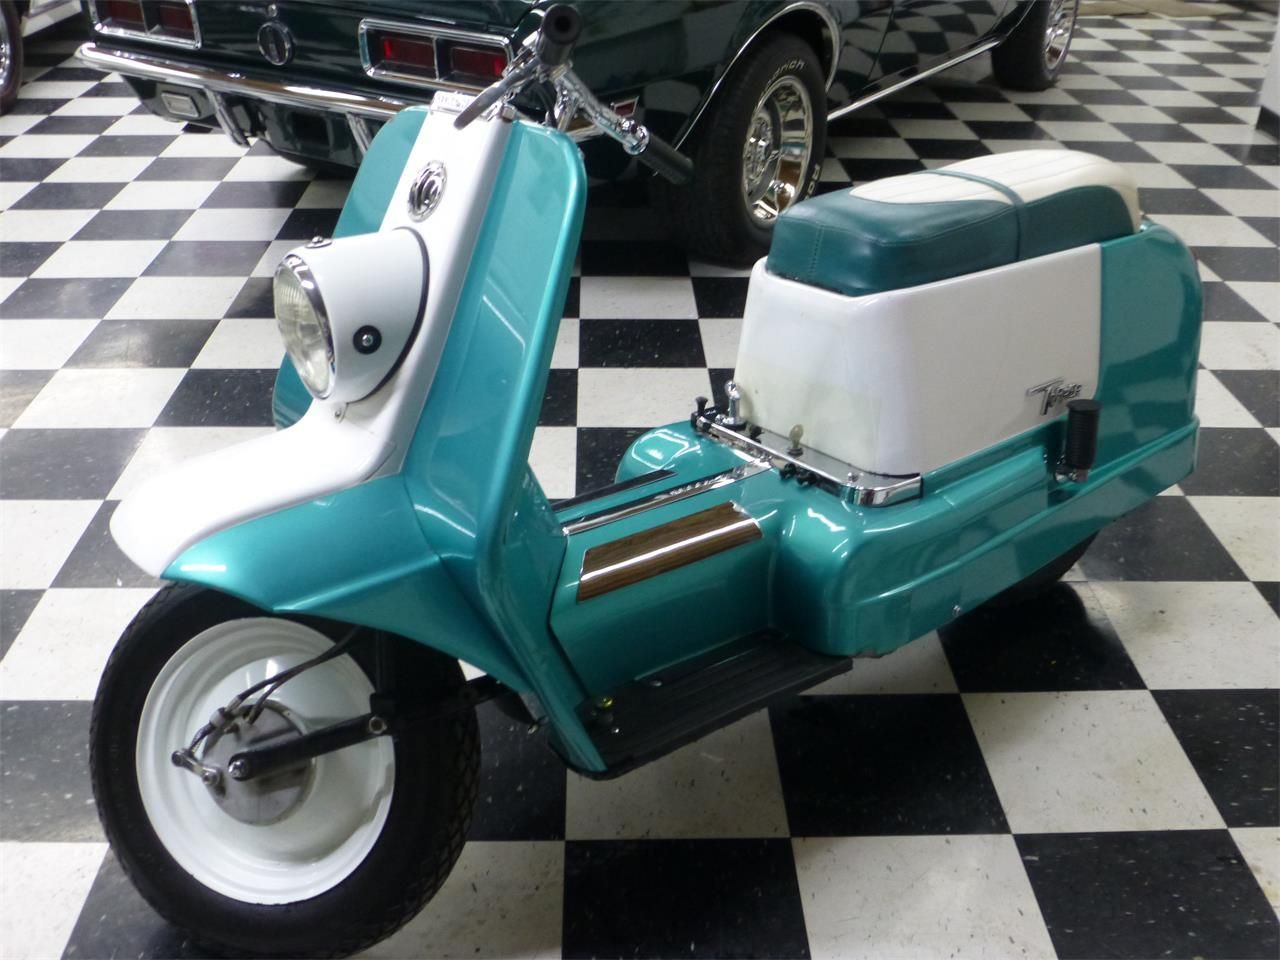 Harley previously produced a scooter in the 1960s known as the 